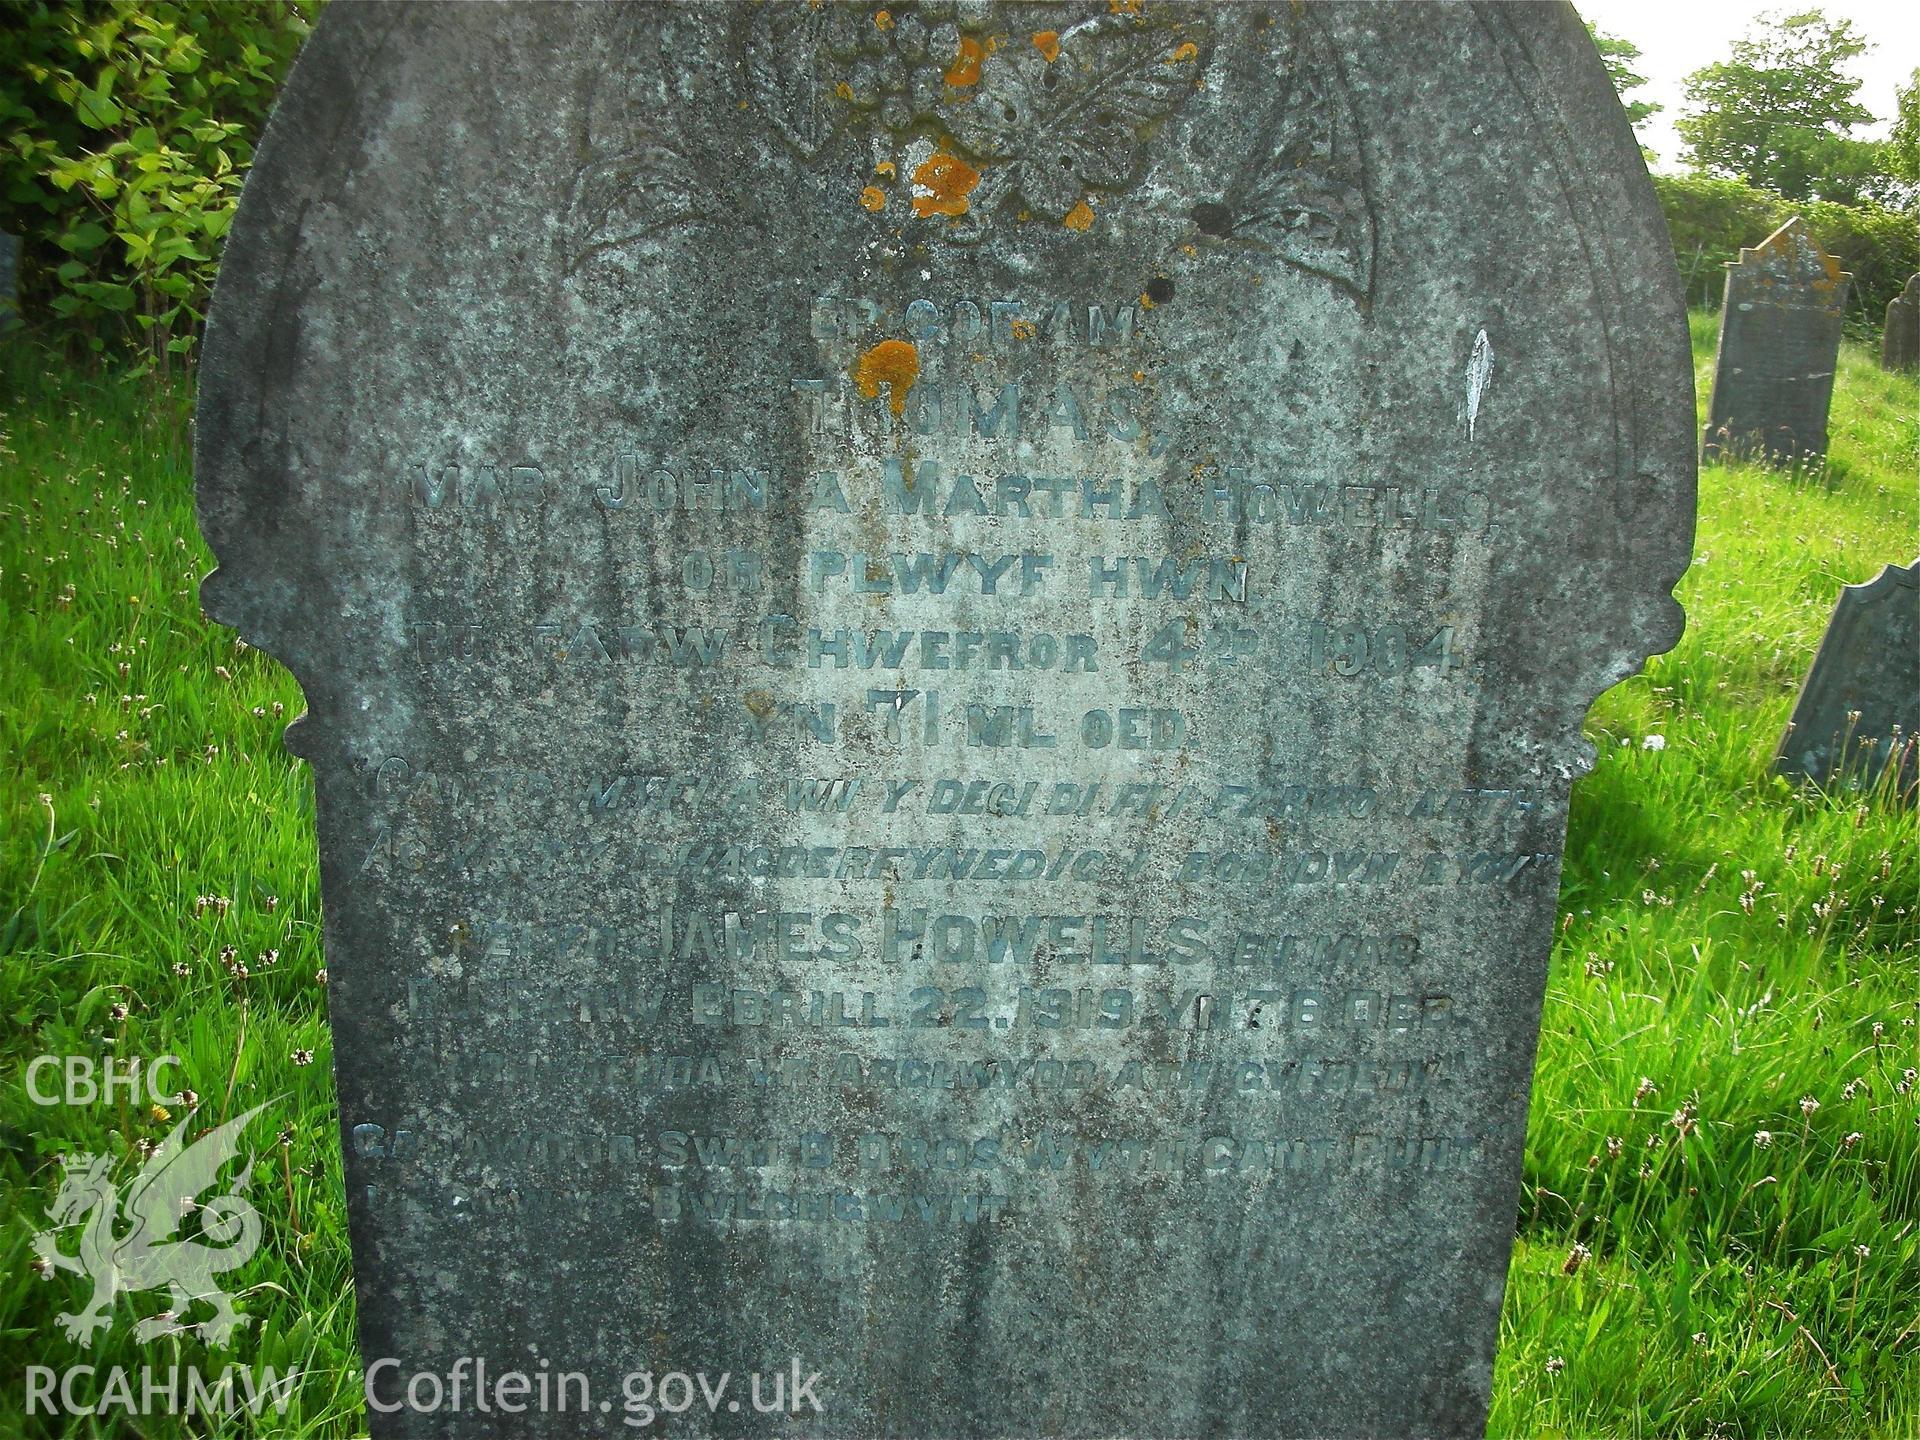 'Unusual headstone at Bwlchgwynt. The deceased let it be known they had left £800 to the Chapel by inscribing it on the headstone itself: GADAWODD SWM O DROS WYTH CANT PUNT (LEFT A SUM OF OVER EIGHT HUNDRED POUNDS).' Photographed by Keith Bowen in 2010